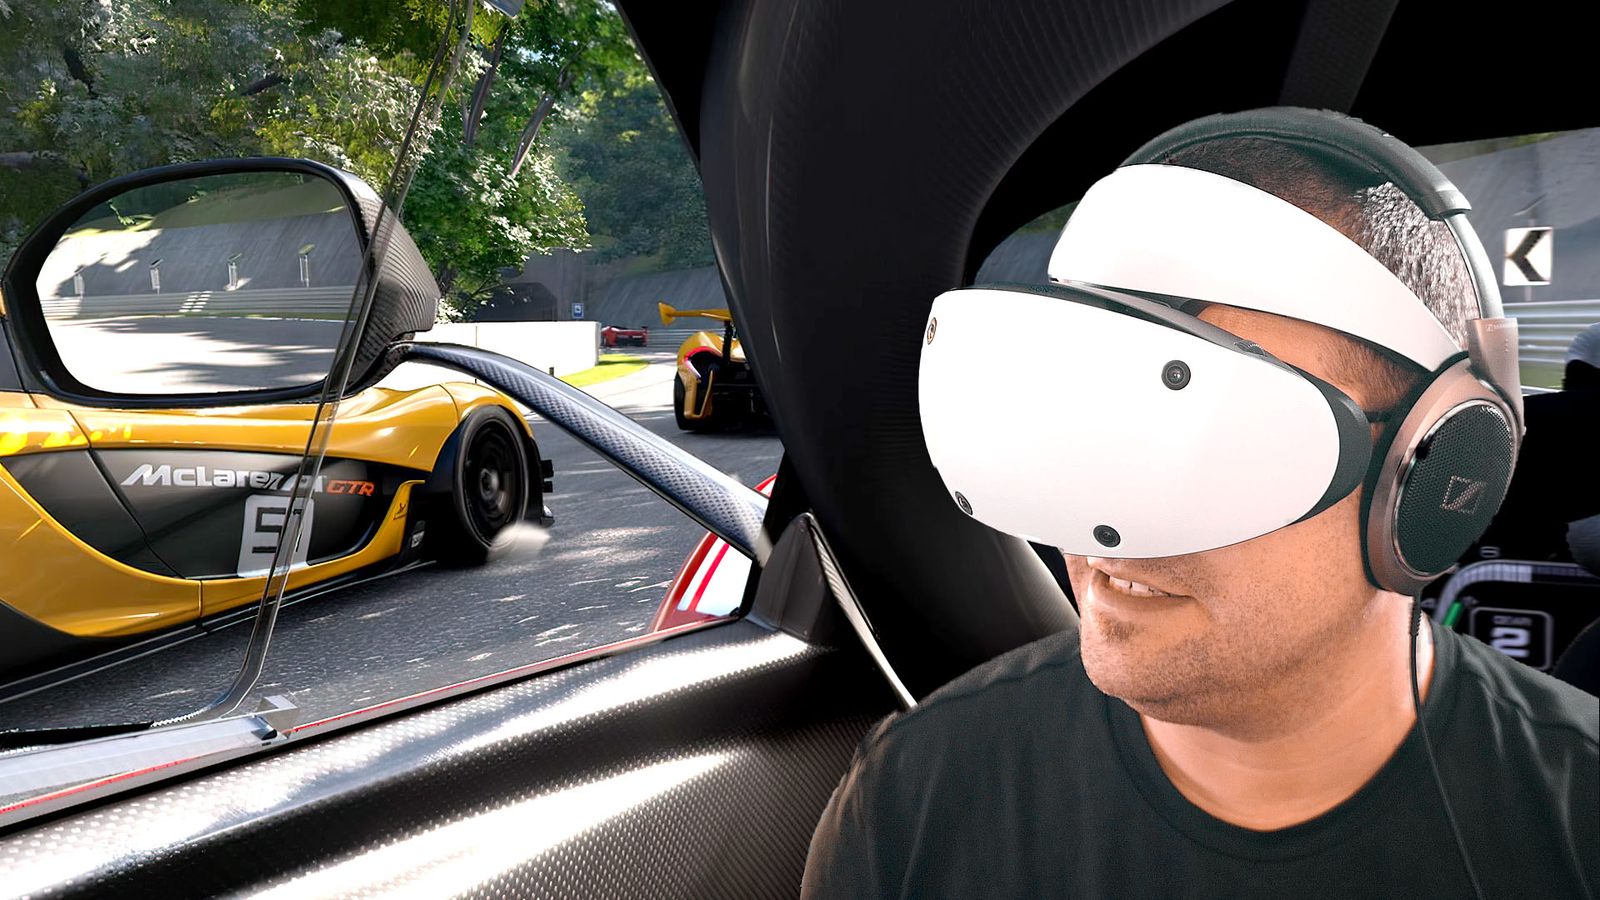 Free PS VR2 Upgrade Coming to GT7. Experience a New Level of